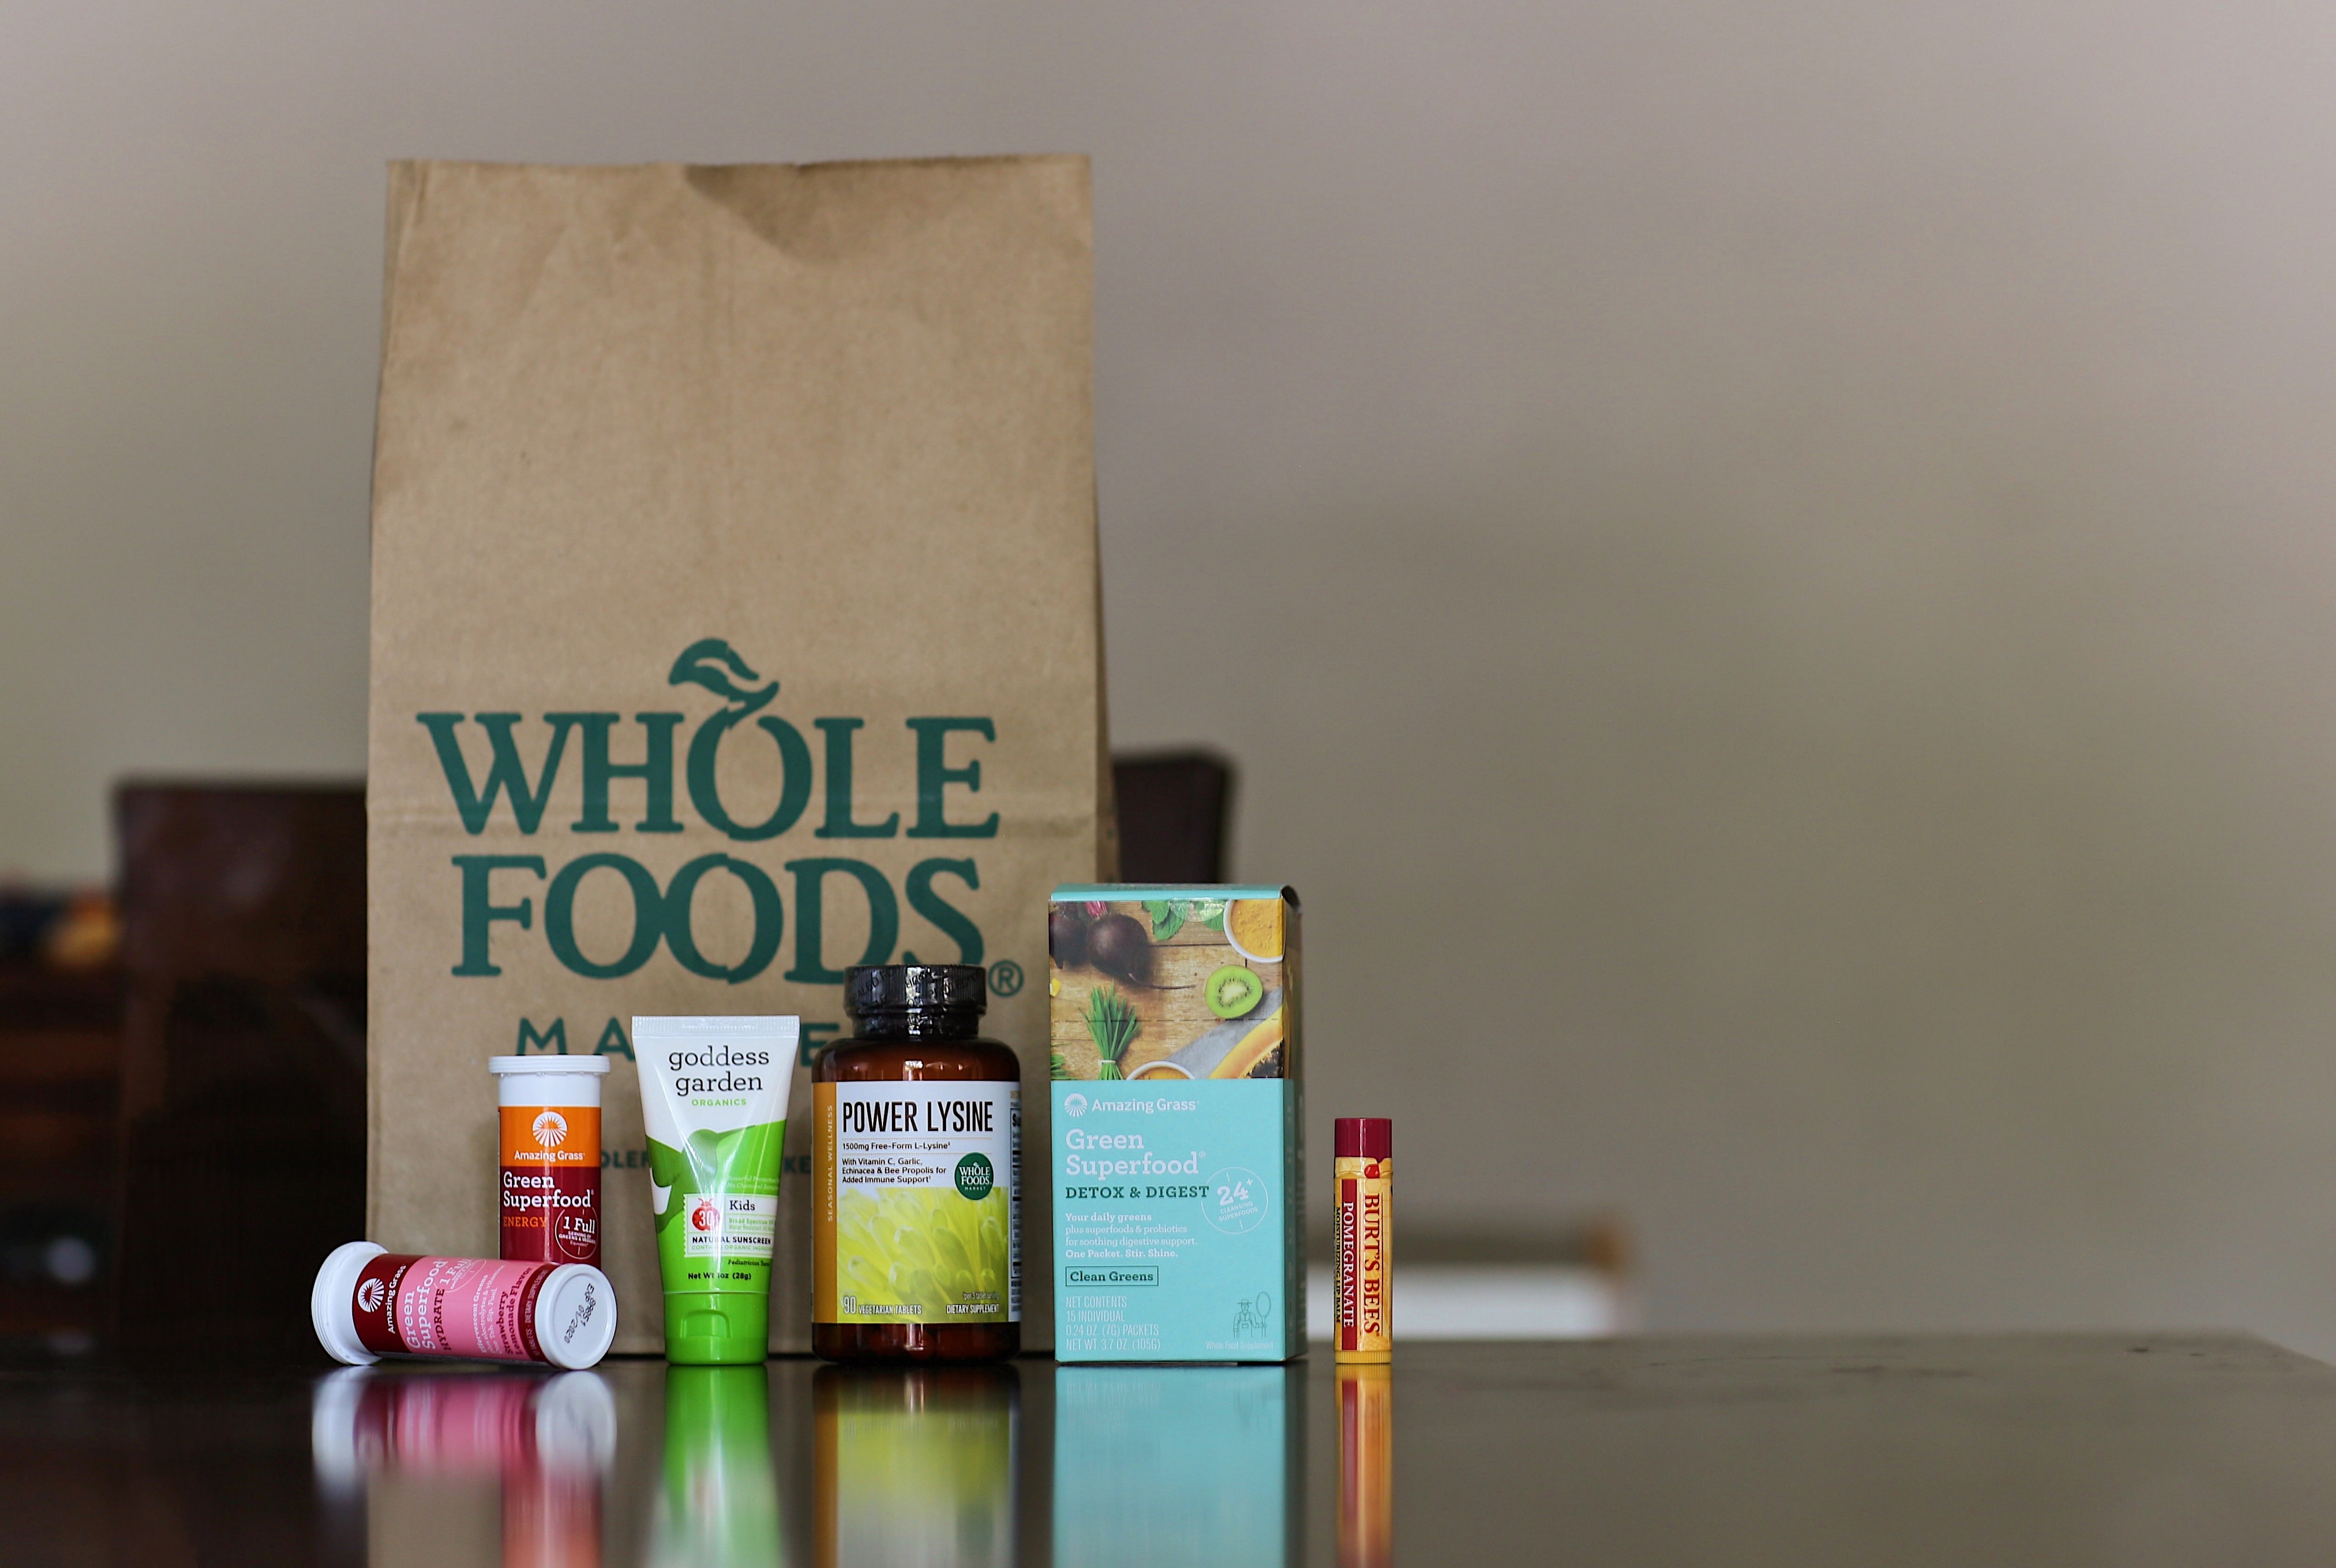 A whole foods bag and assorted health supplements